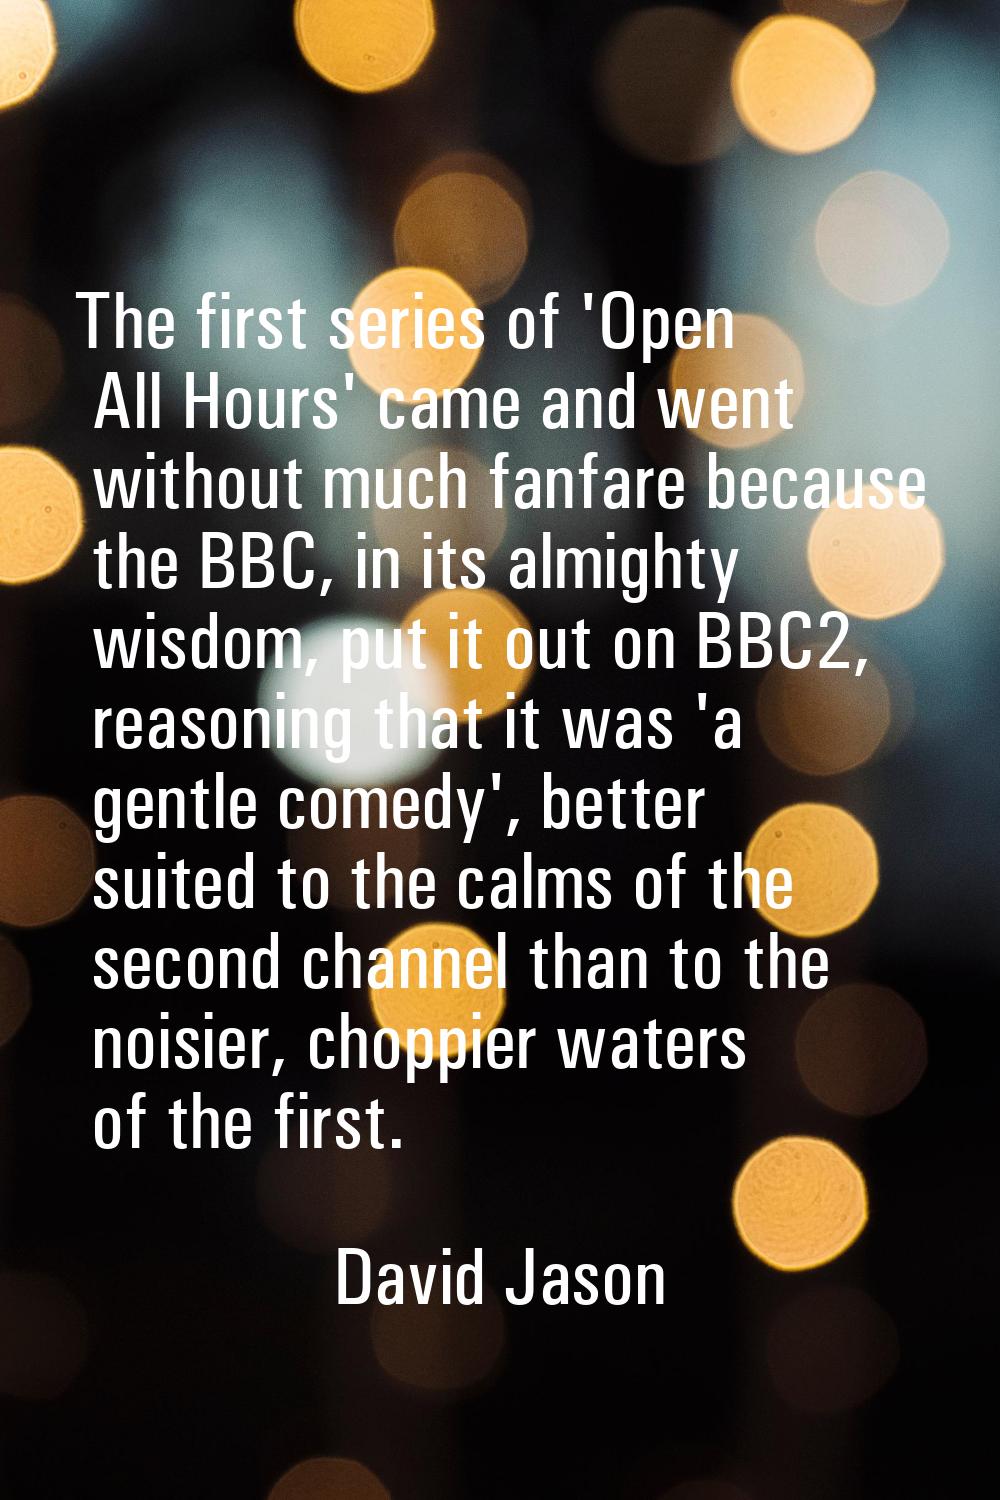 The first series of 'Open All Hours' came and went without much fanfare because the BBC, in its alm